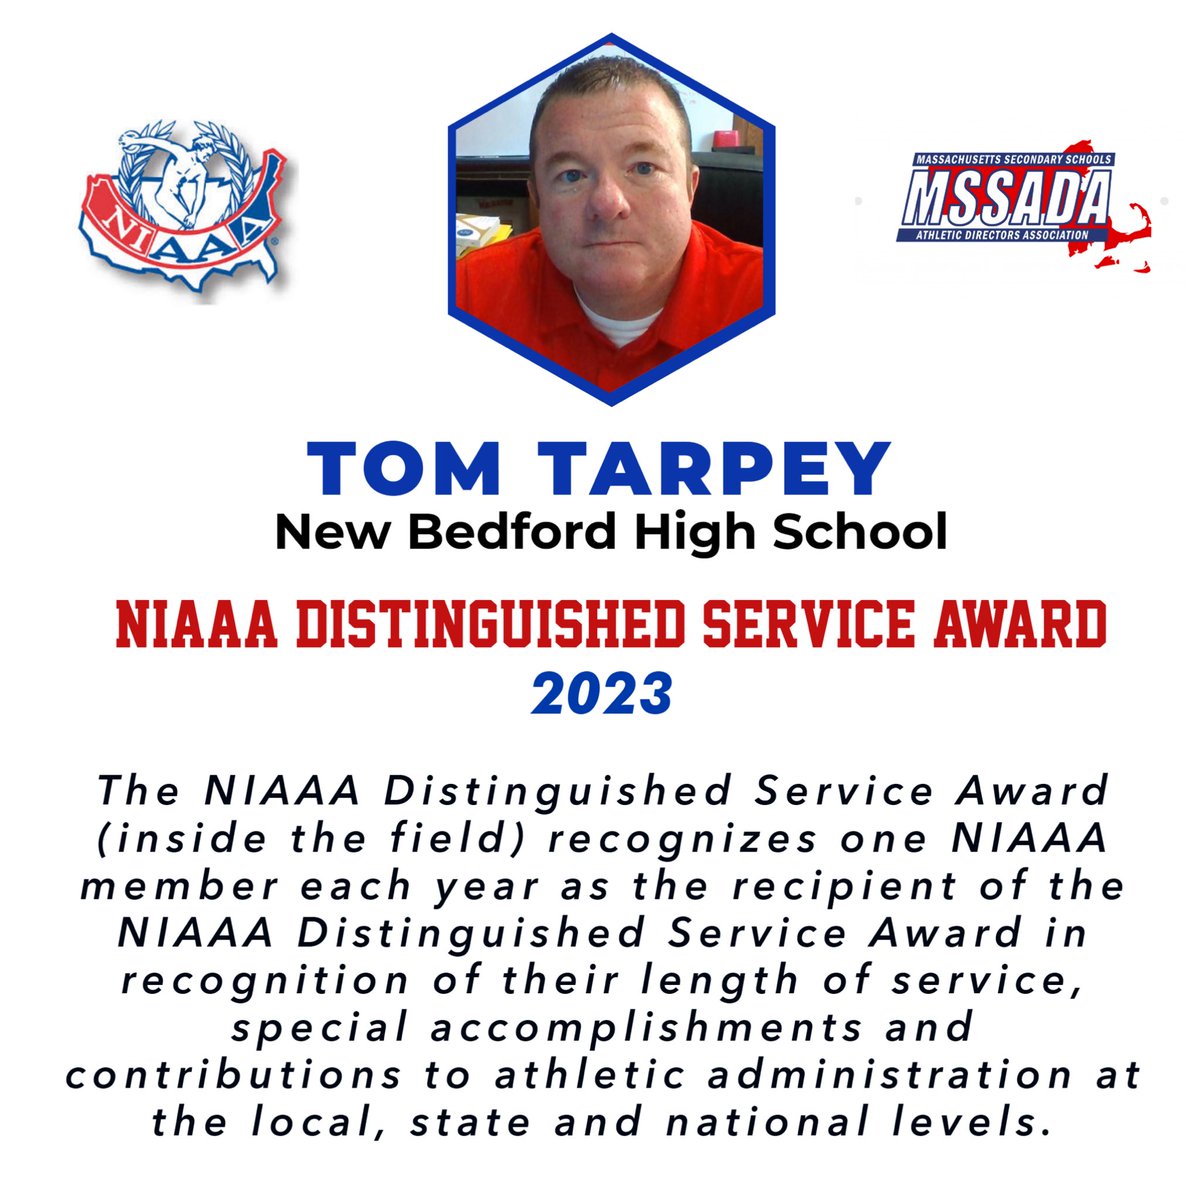 Congrats to Tom Tarpey on being the recipient of the NIAAA Distinguished Service Award - Inside the Field of Athletic Administration!